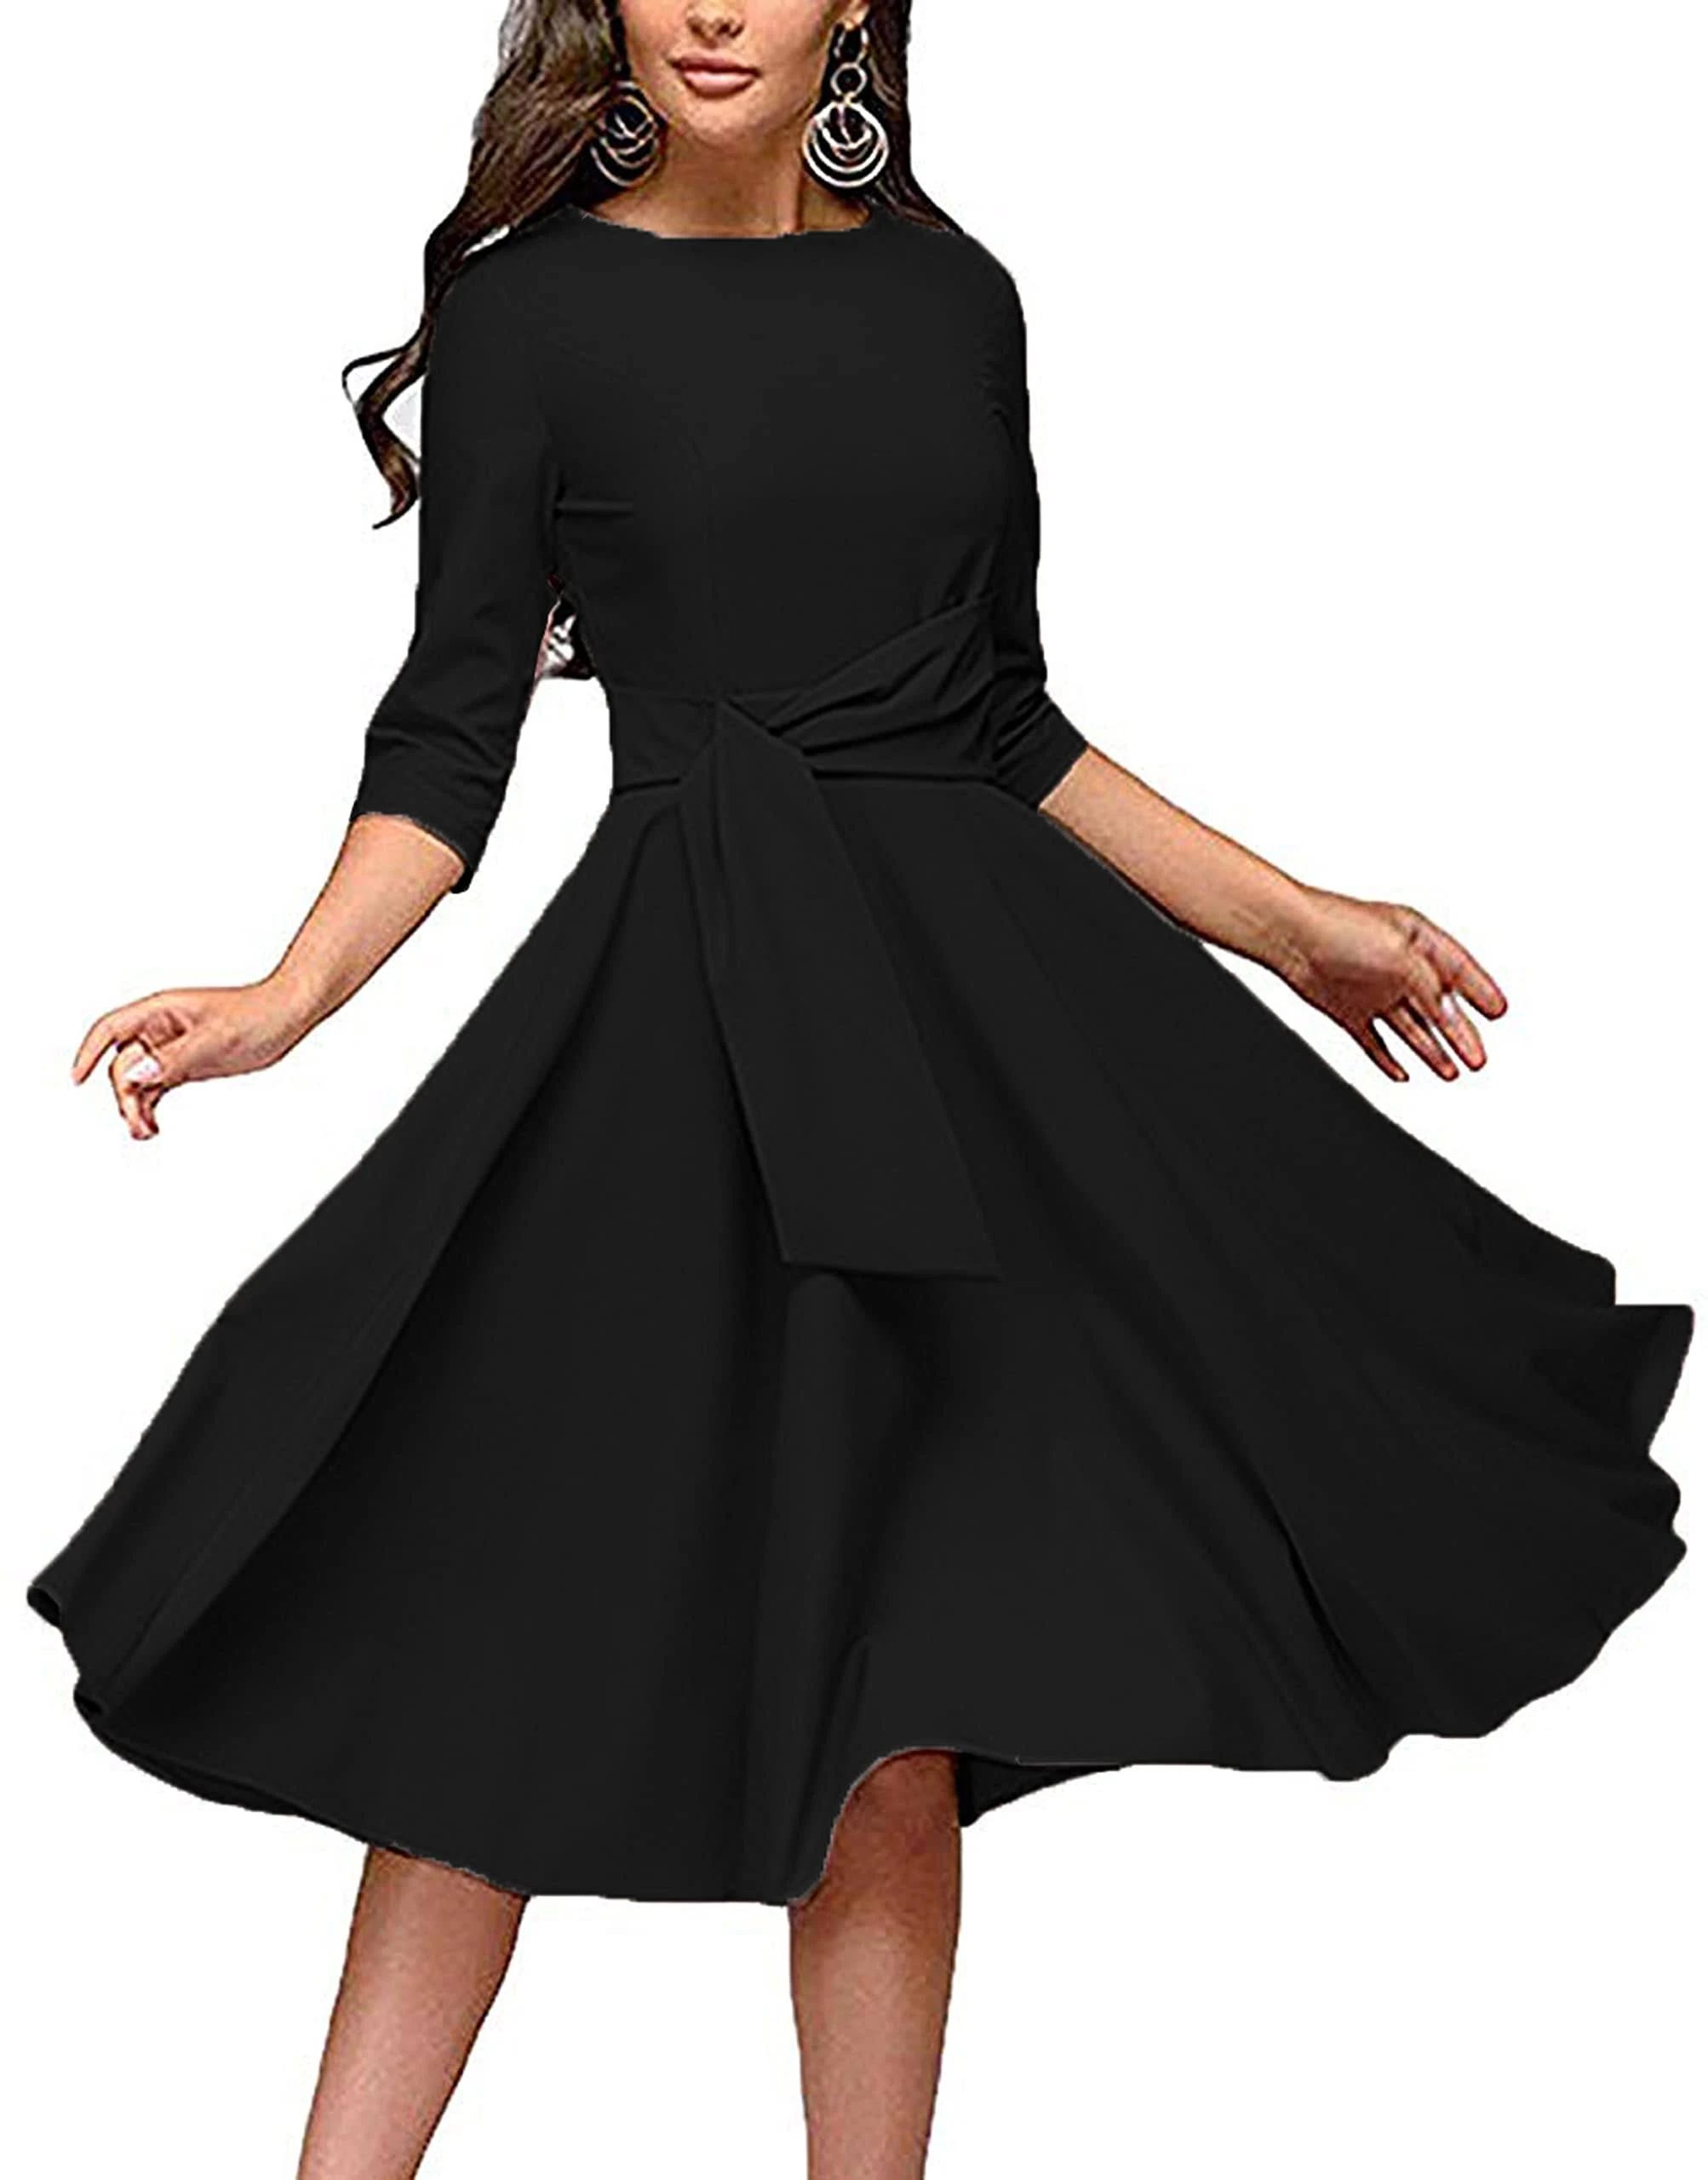 Breathable, Chic Winter Midi Dress for Casual and Special Occasions | Image